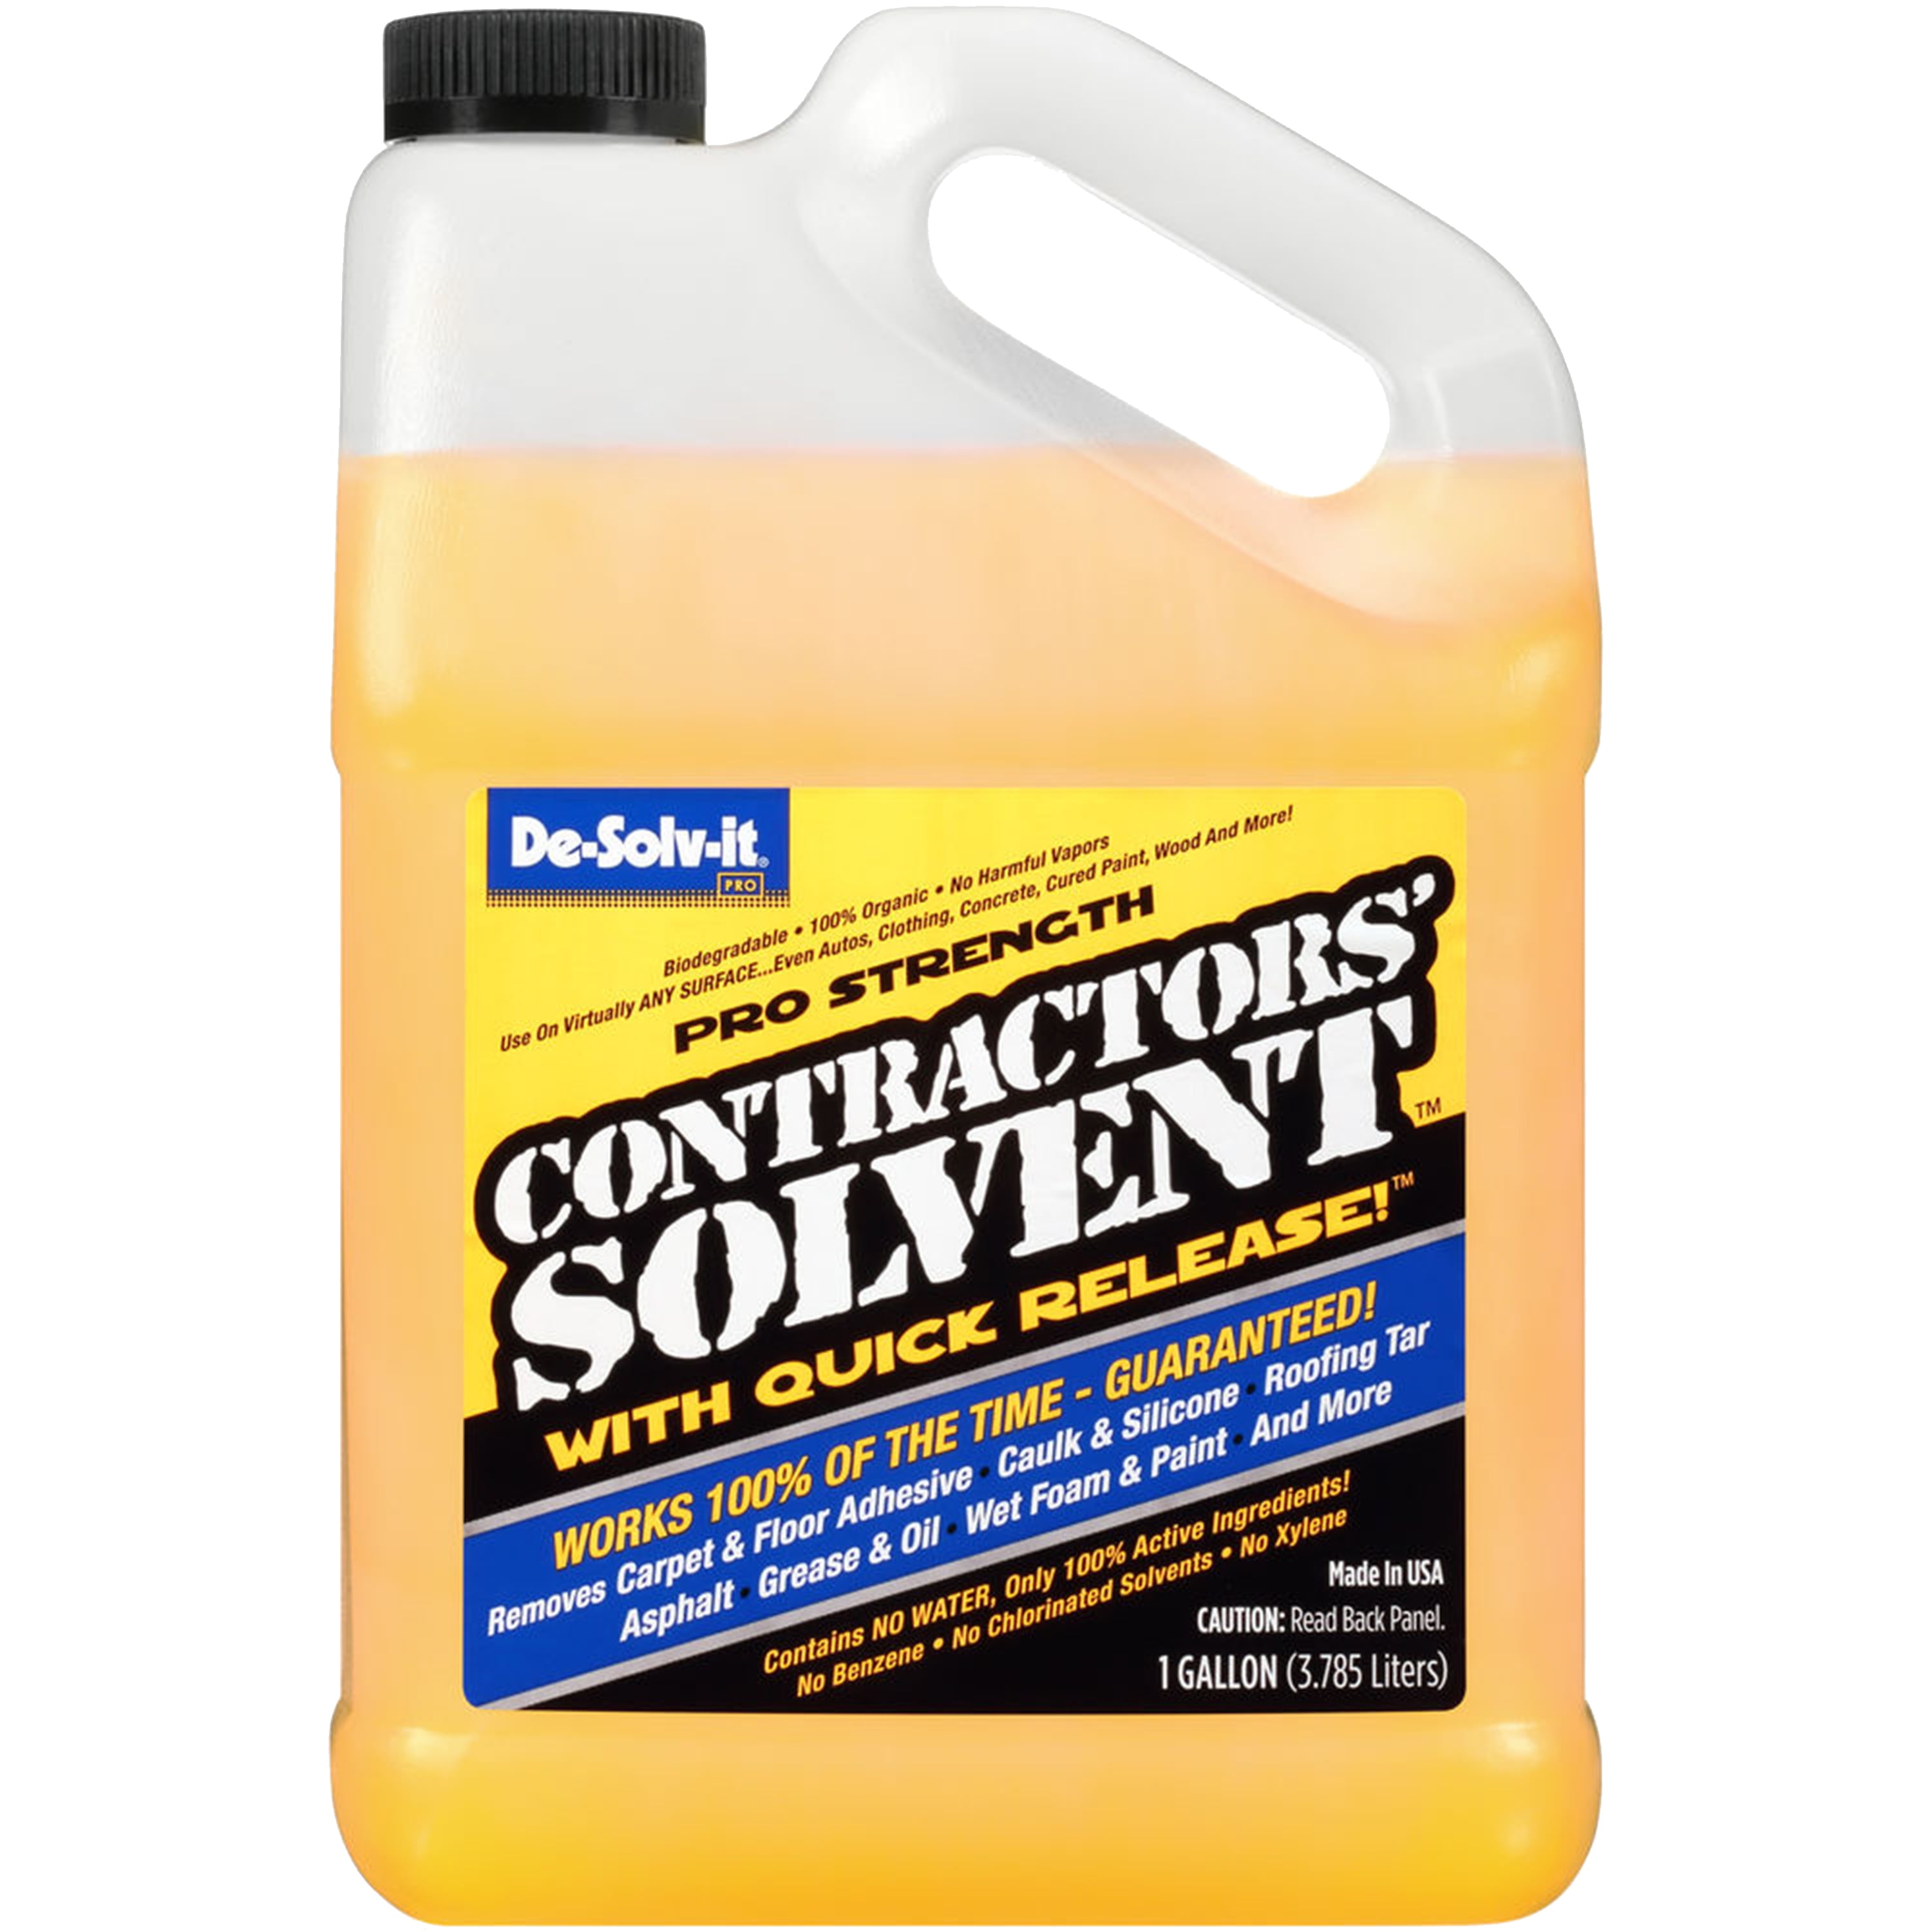 Quality Chemical Aluminum Cleaner and Brightener and Restorer, 1 Gallon,  128 Ounce